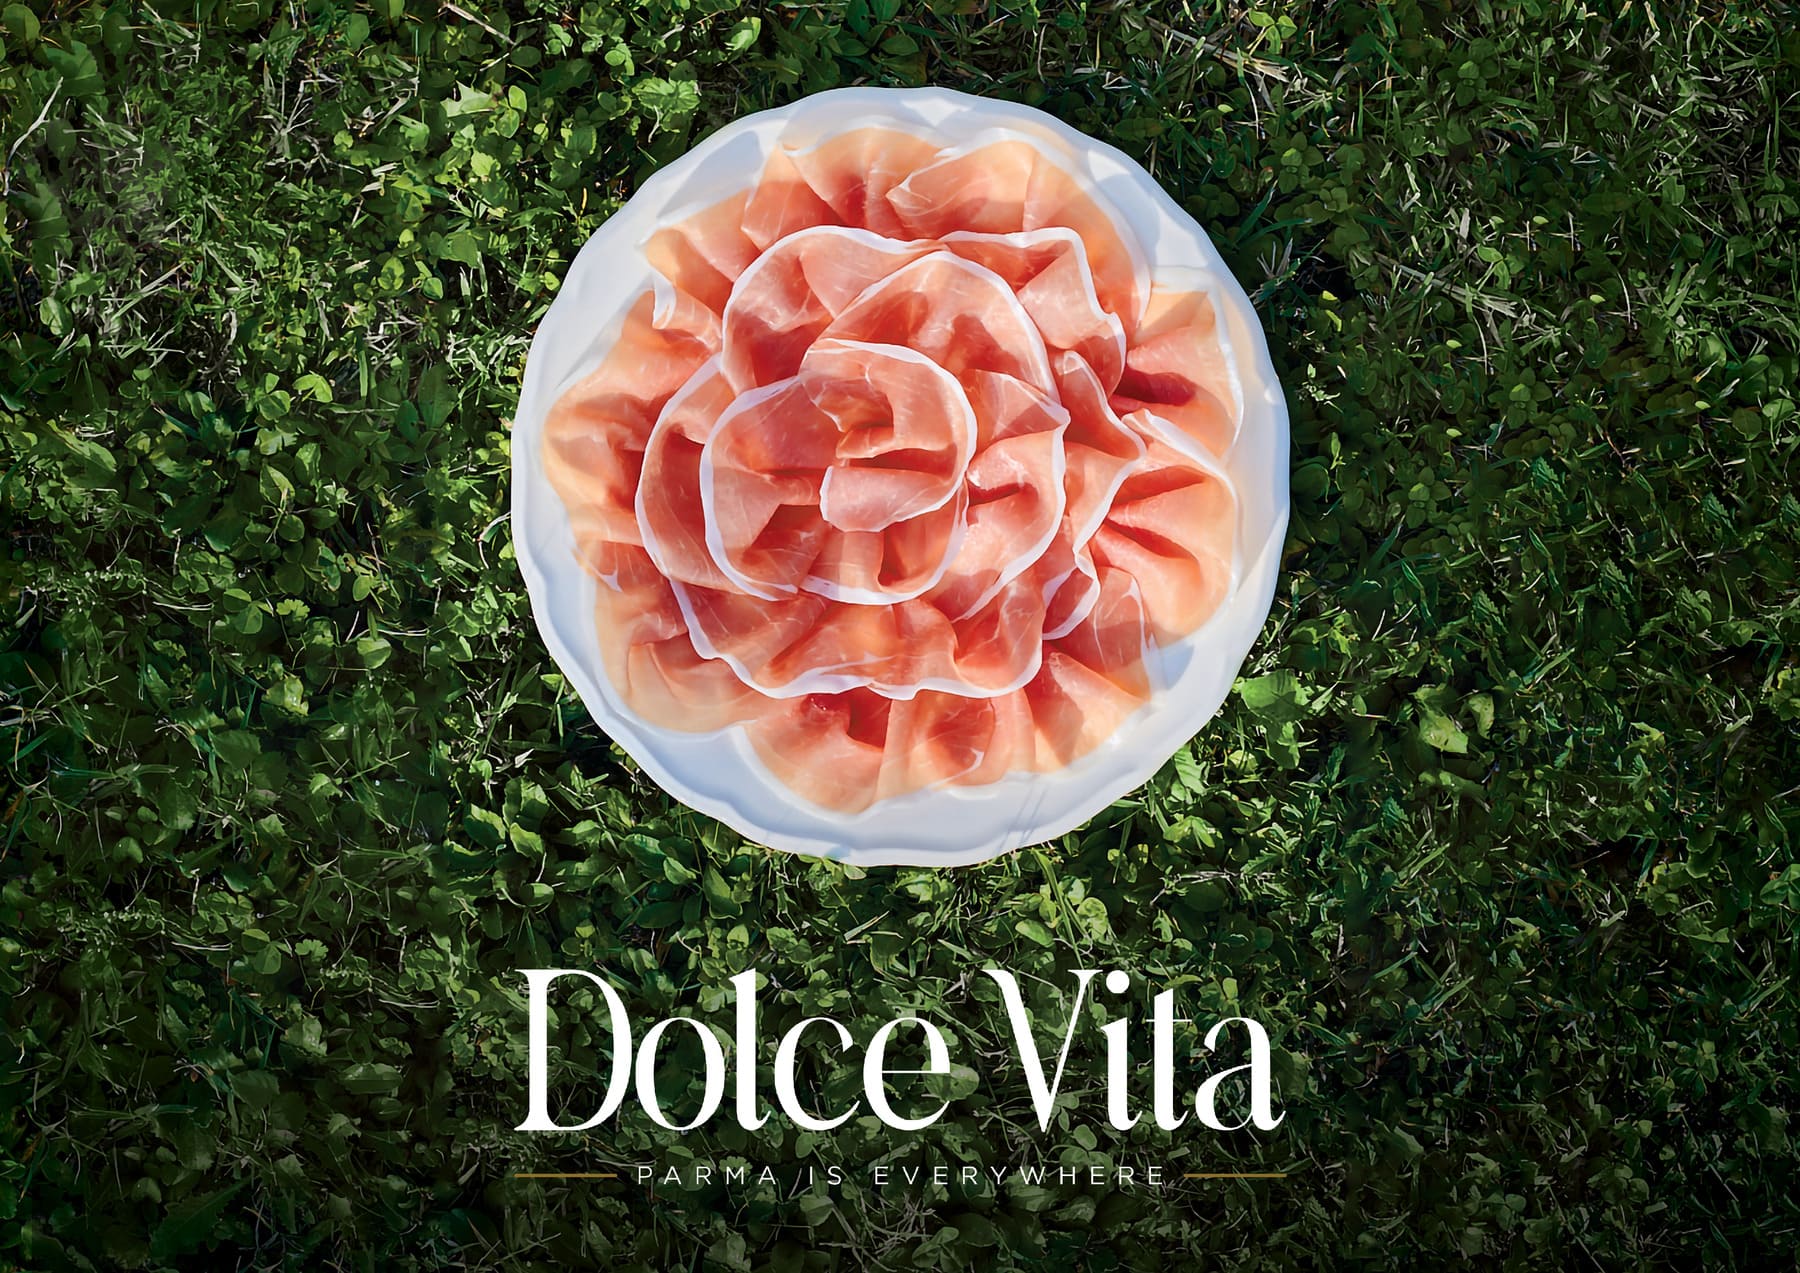 Dolce Vita - Parma is Everywhere